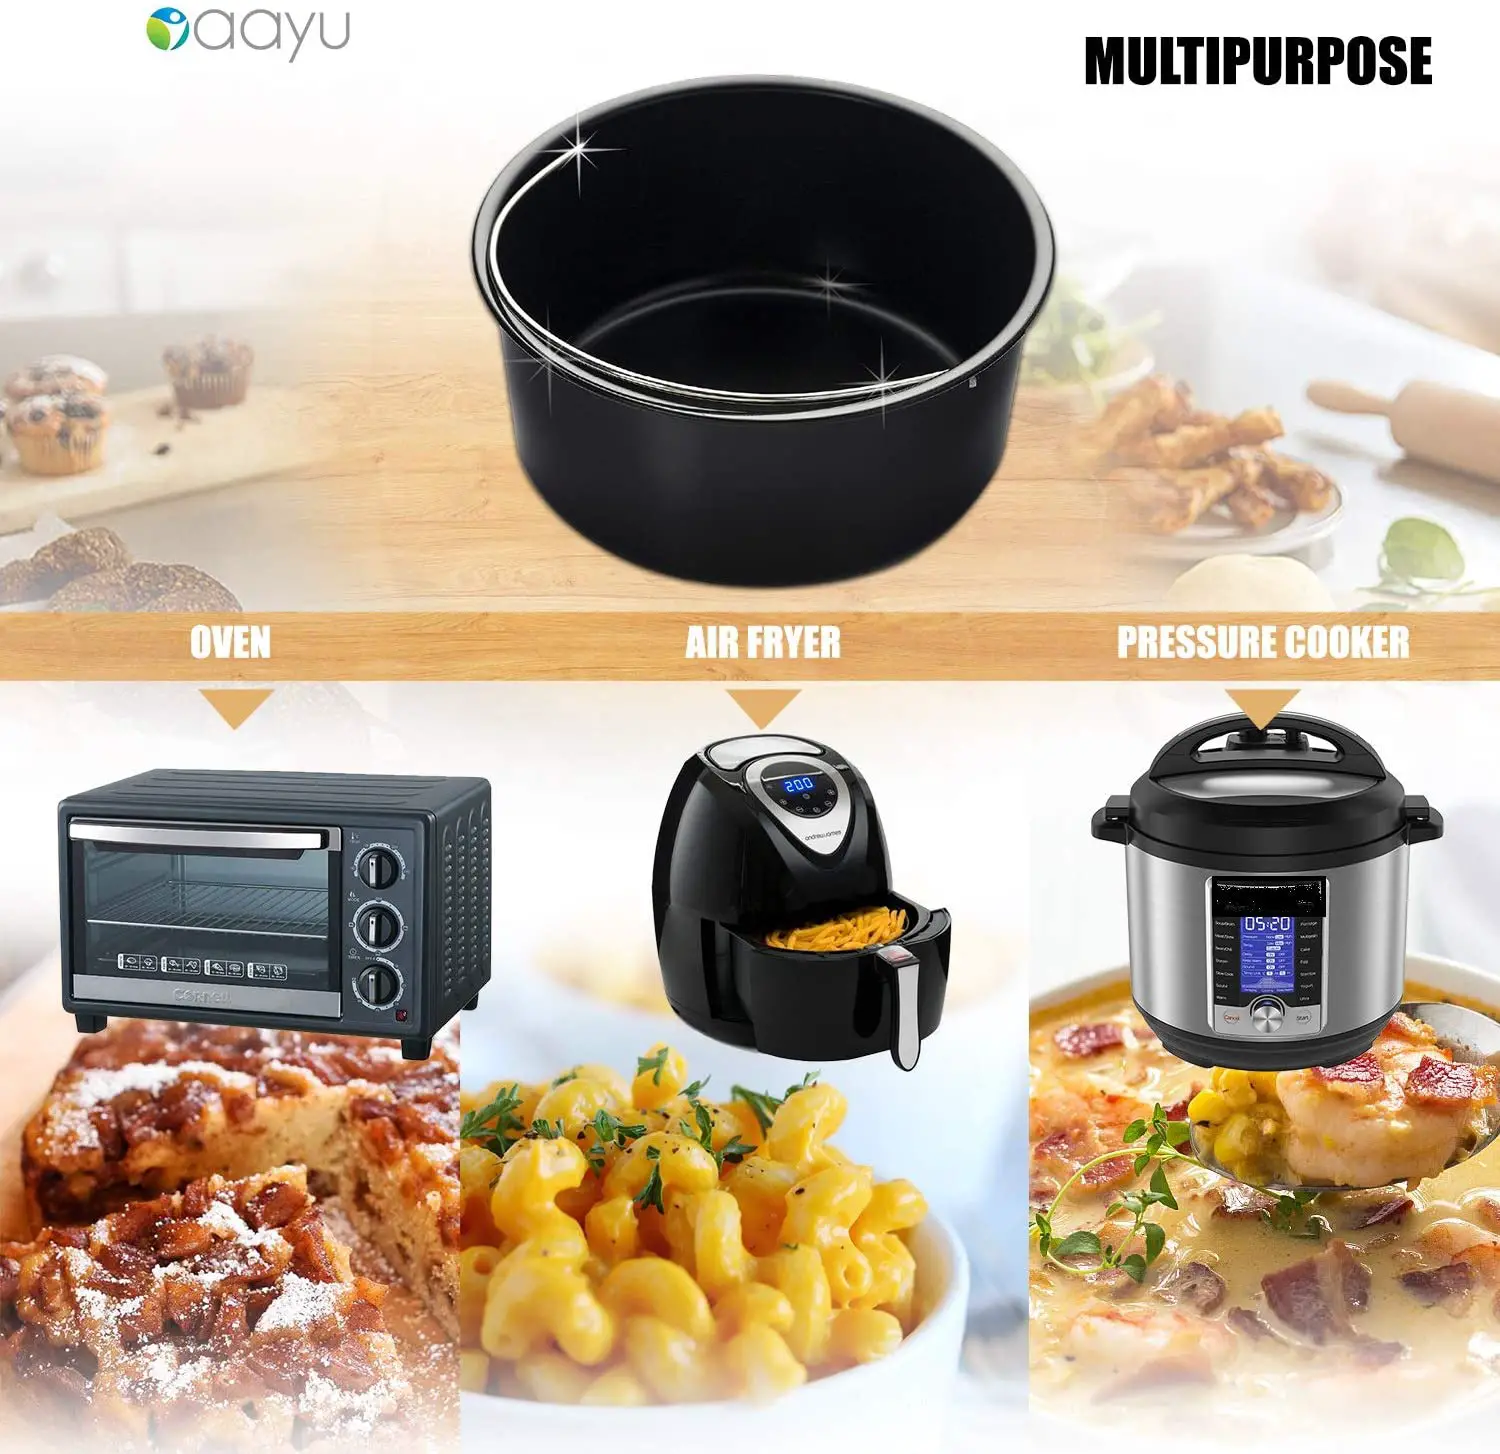 The 15 Best Air Fryer Accessories 2020 [Buying Guide]